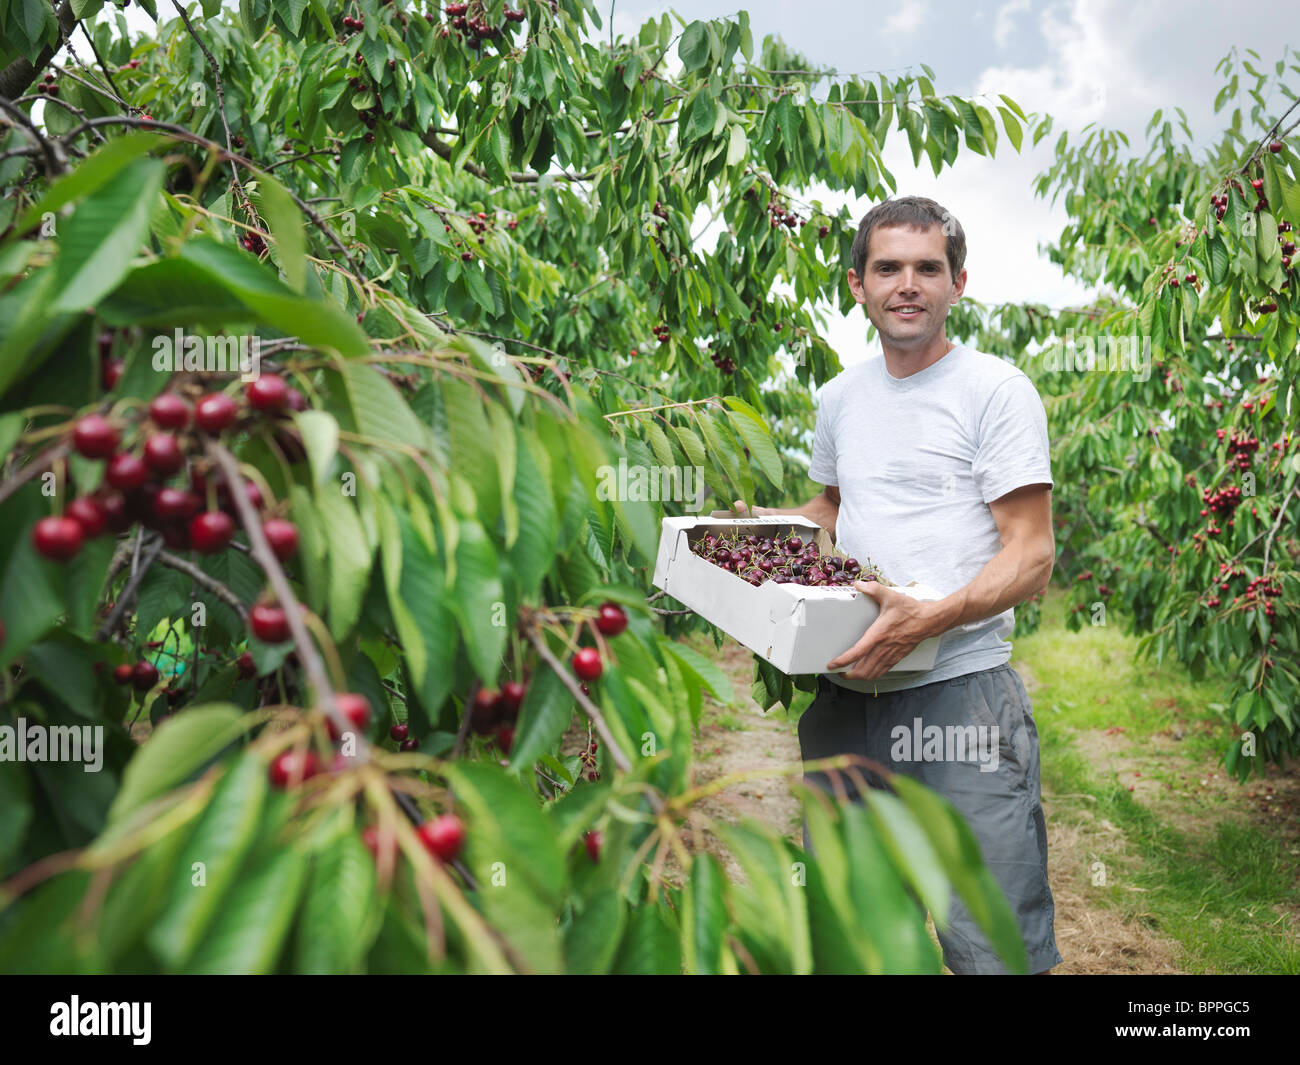 Man in orchard holding box of cherries Stock Photo